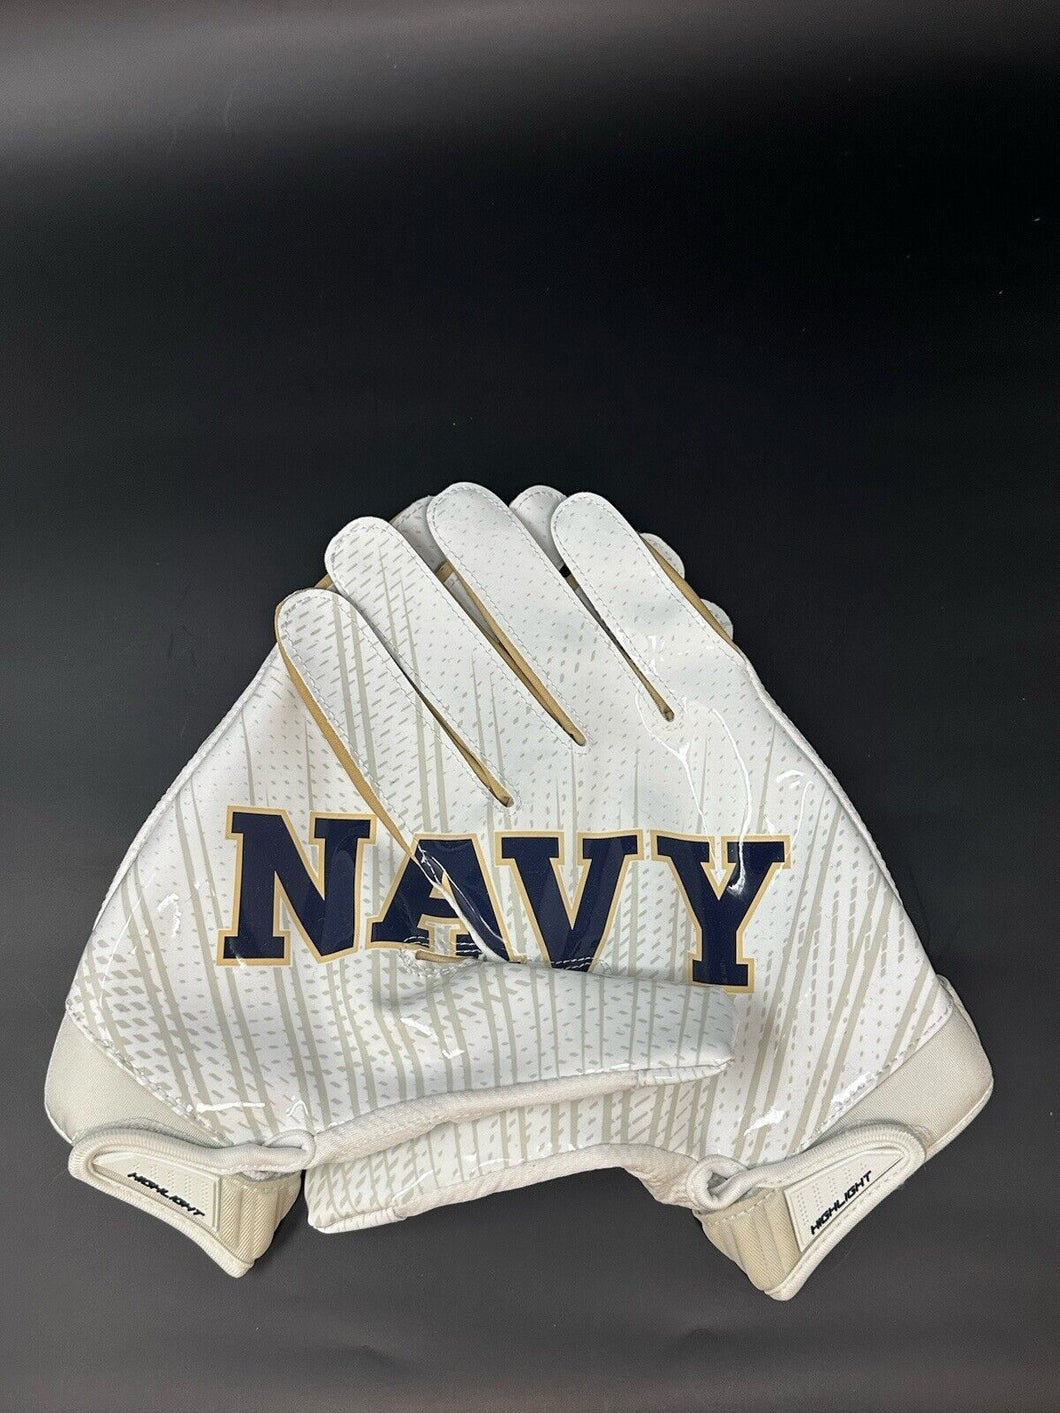 Navy Midshipmen Game Issued Under Armour Football Gloves - Size 3XL